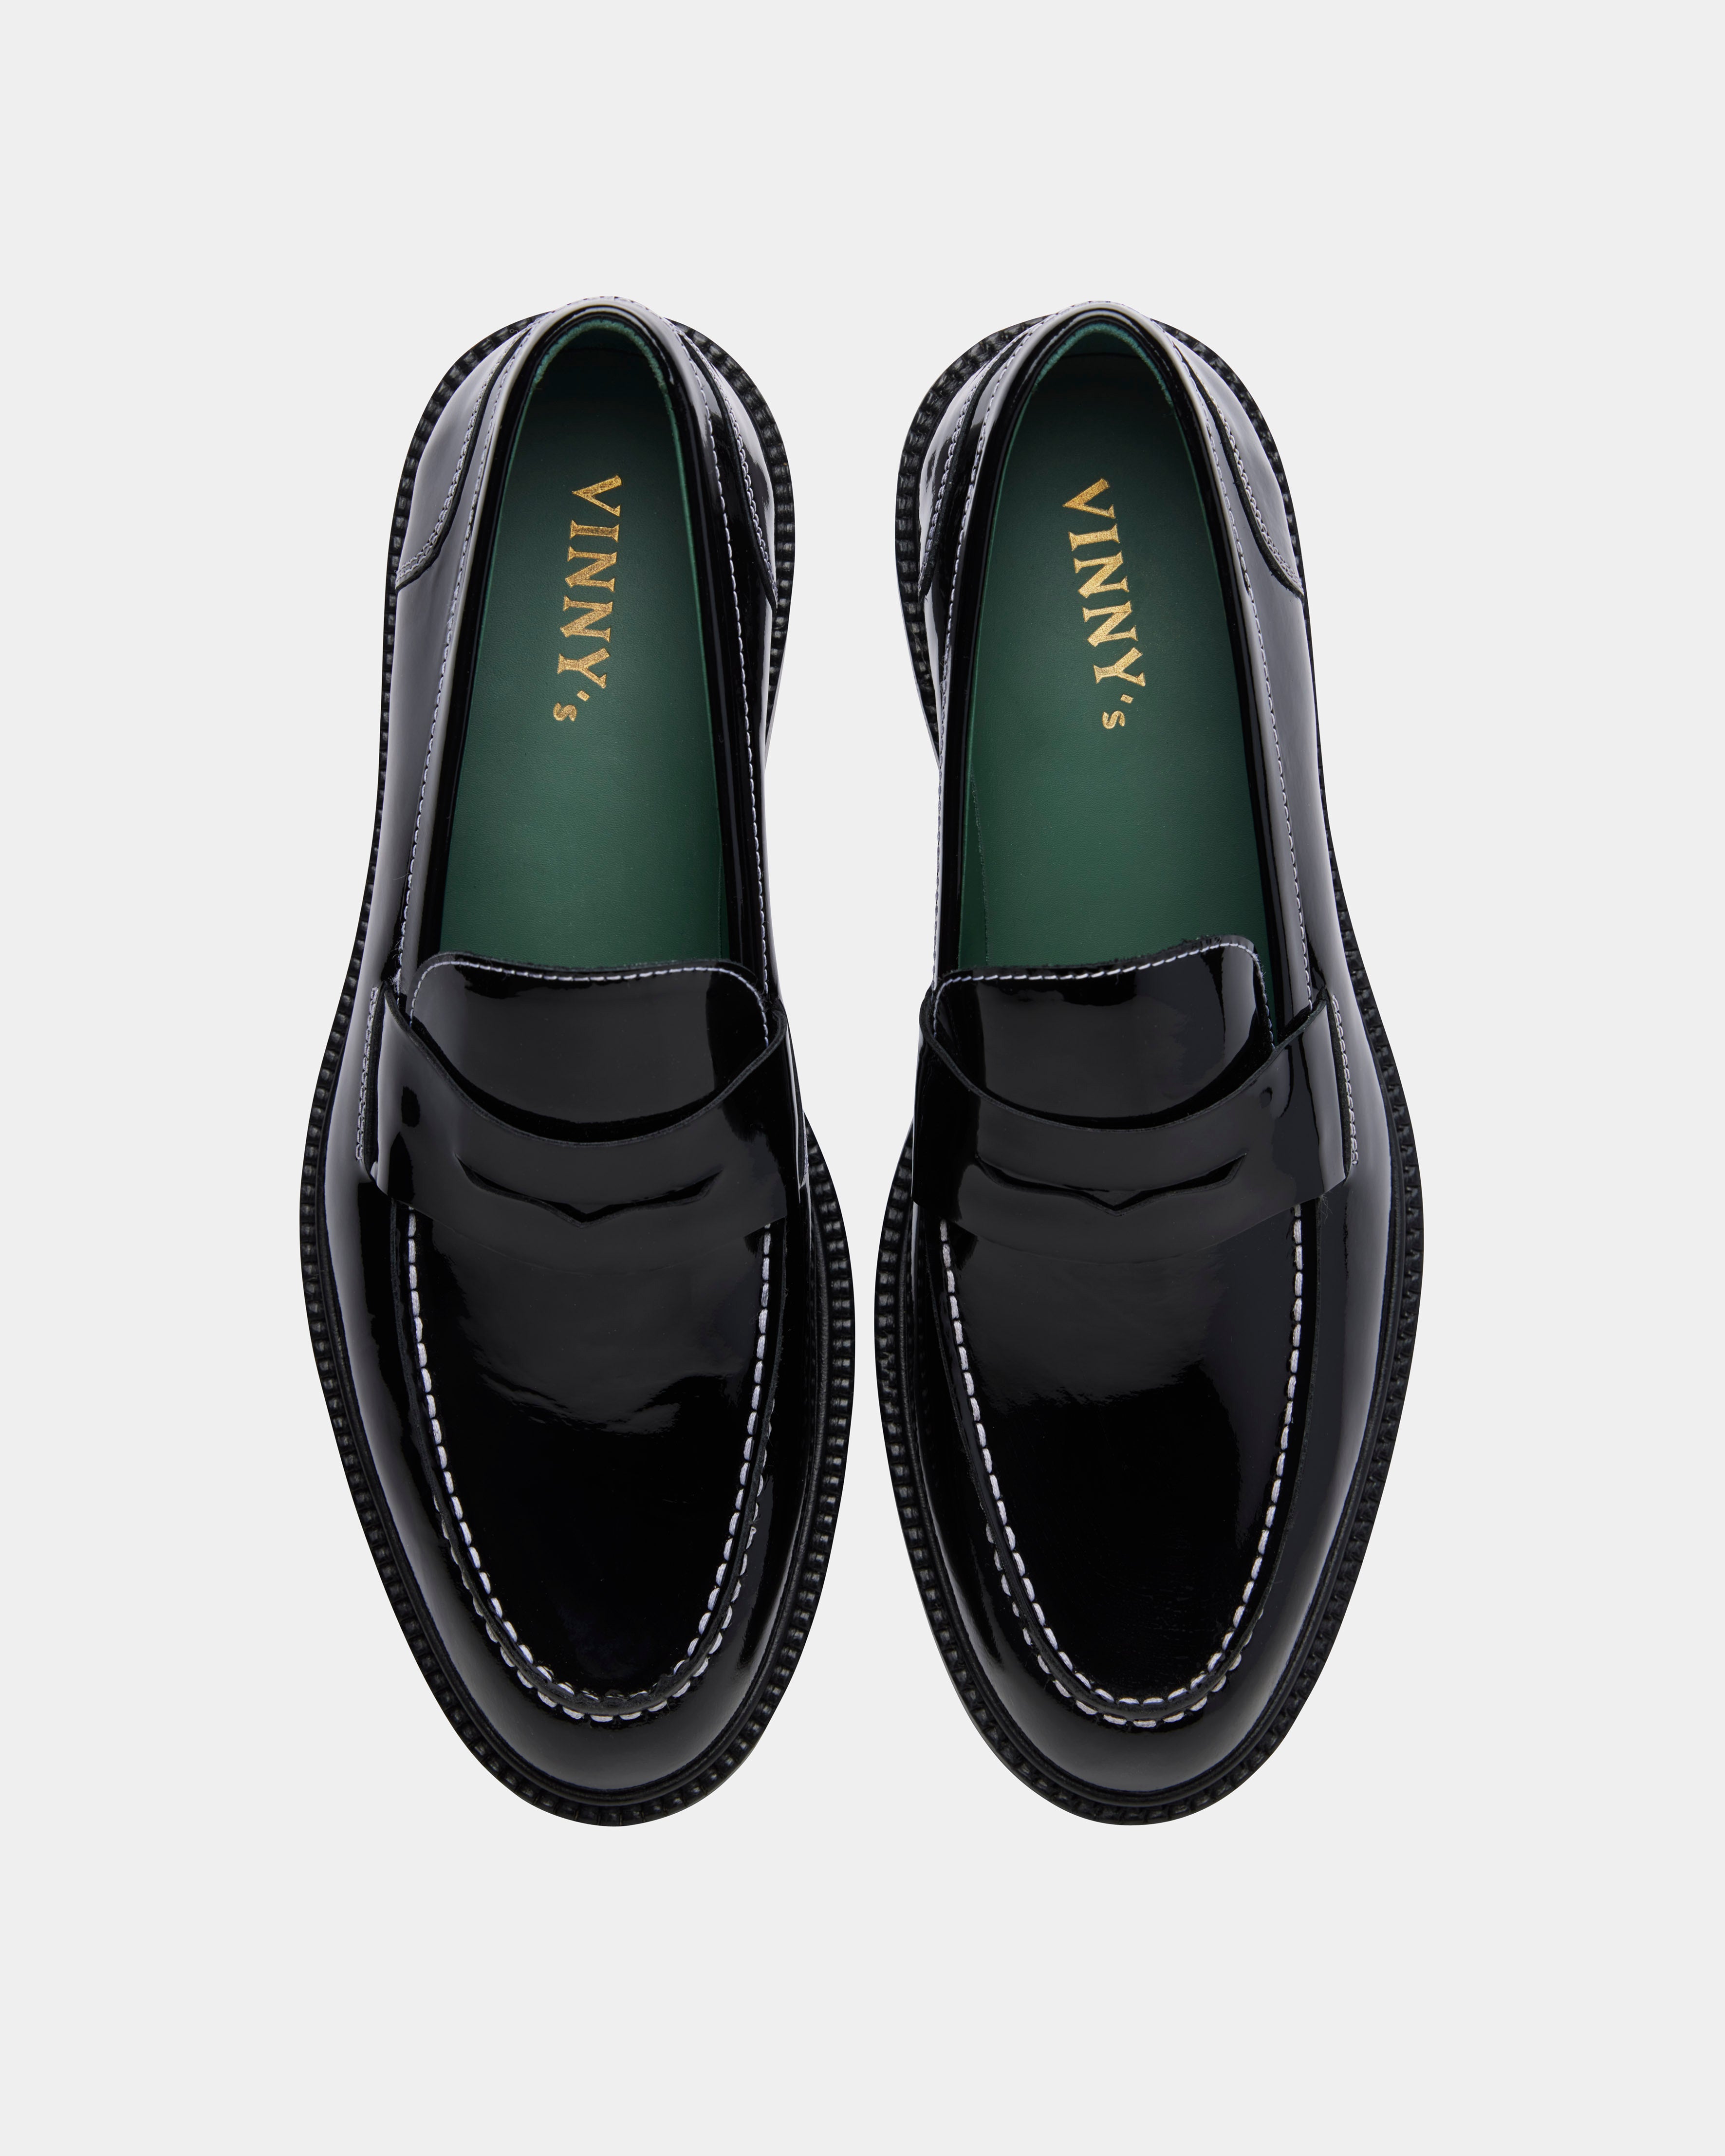 men's loafer in black patent leather